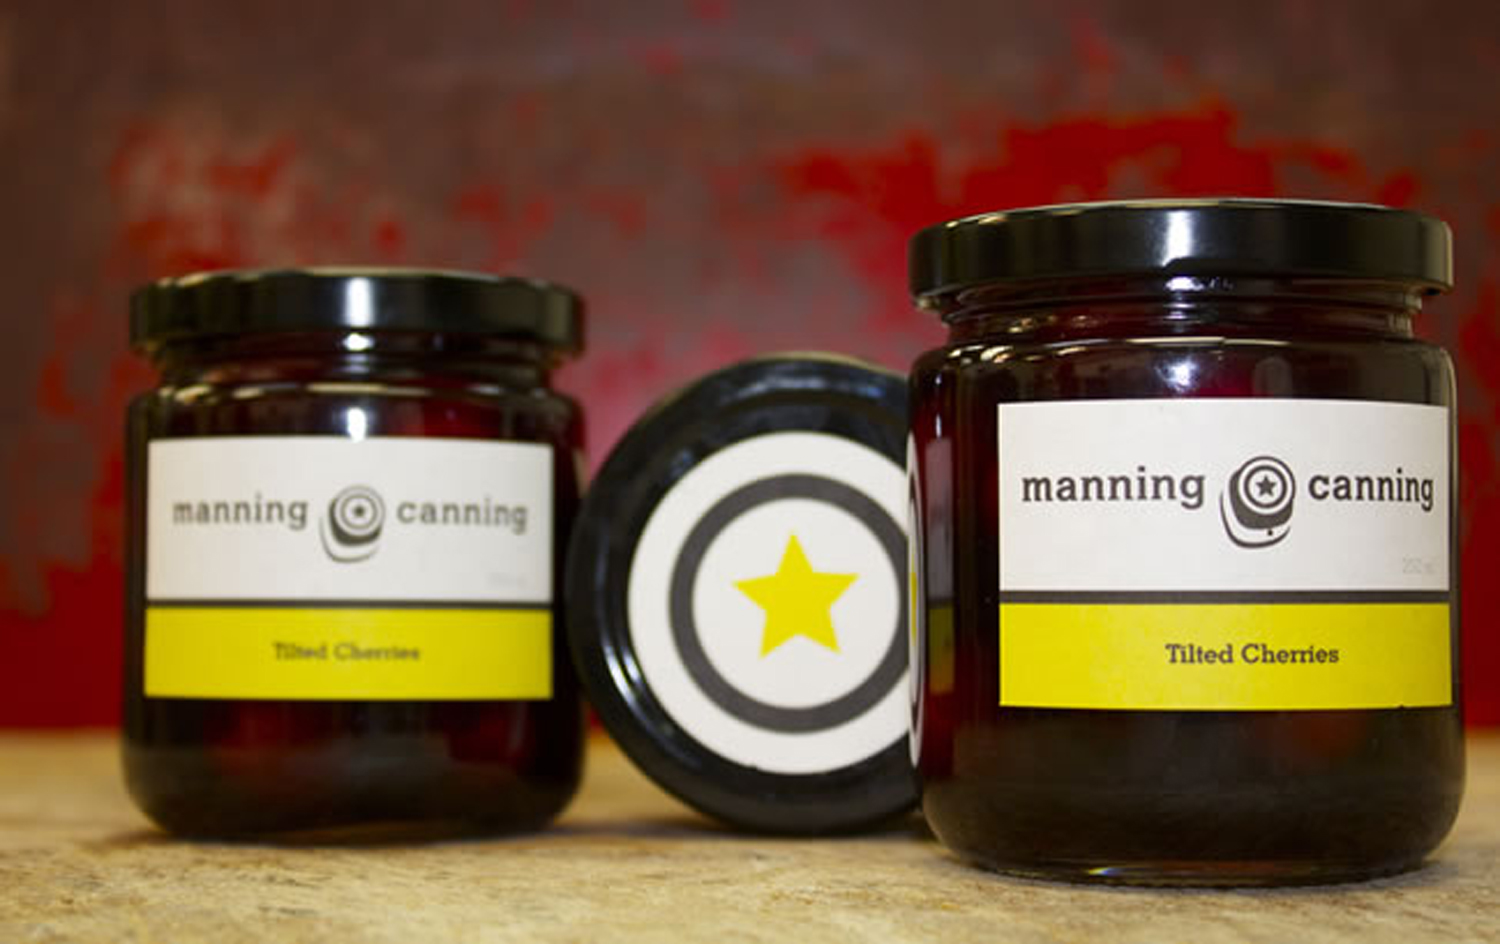 Manning Canning